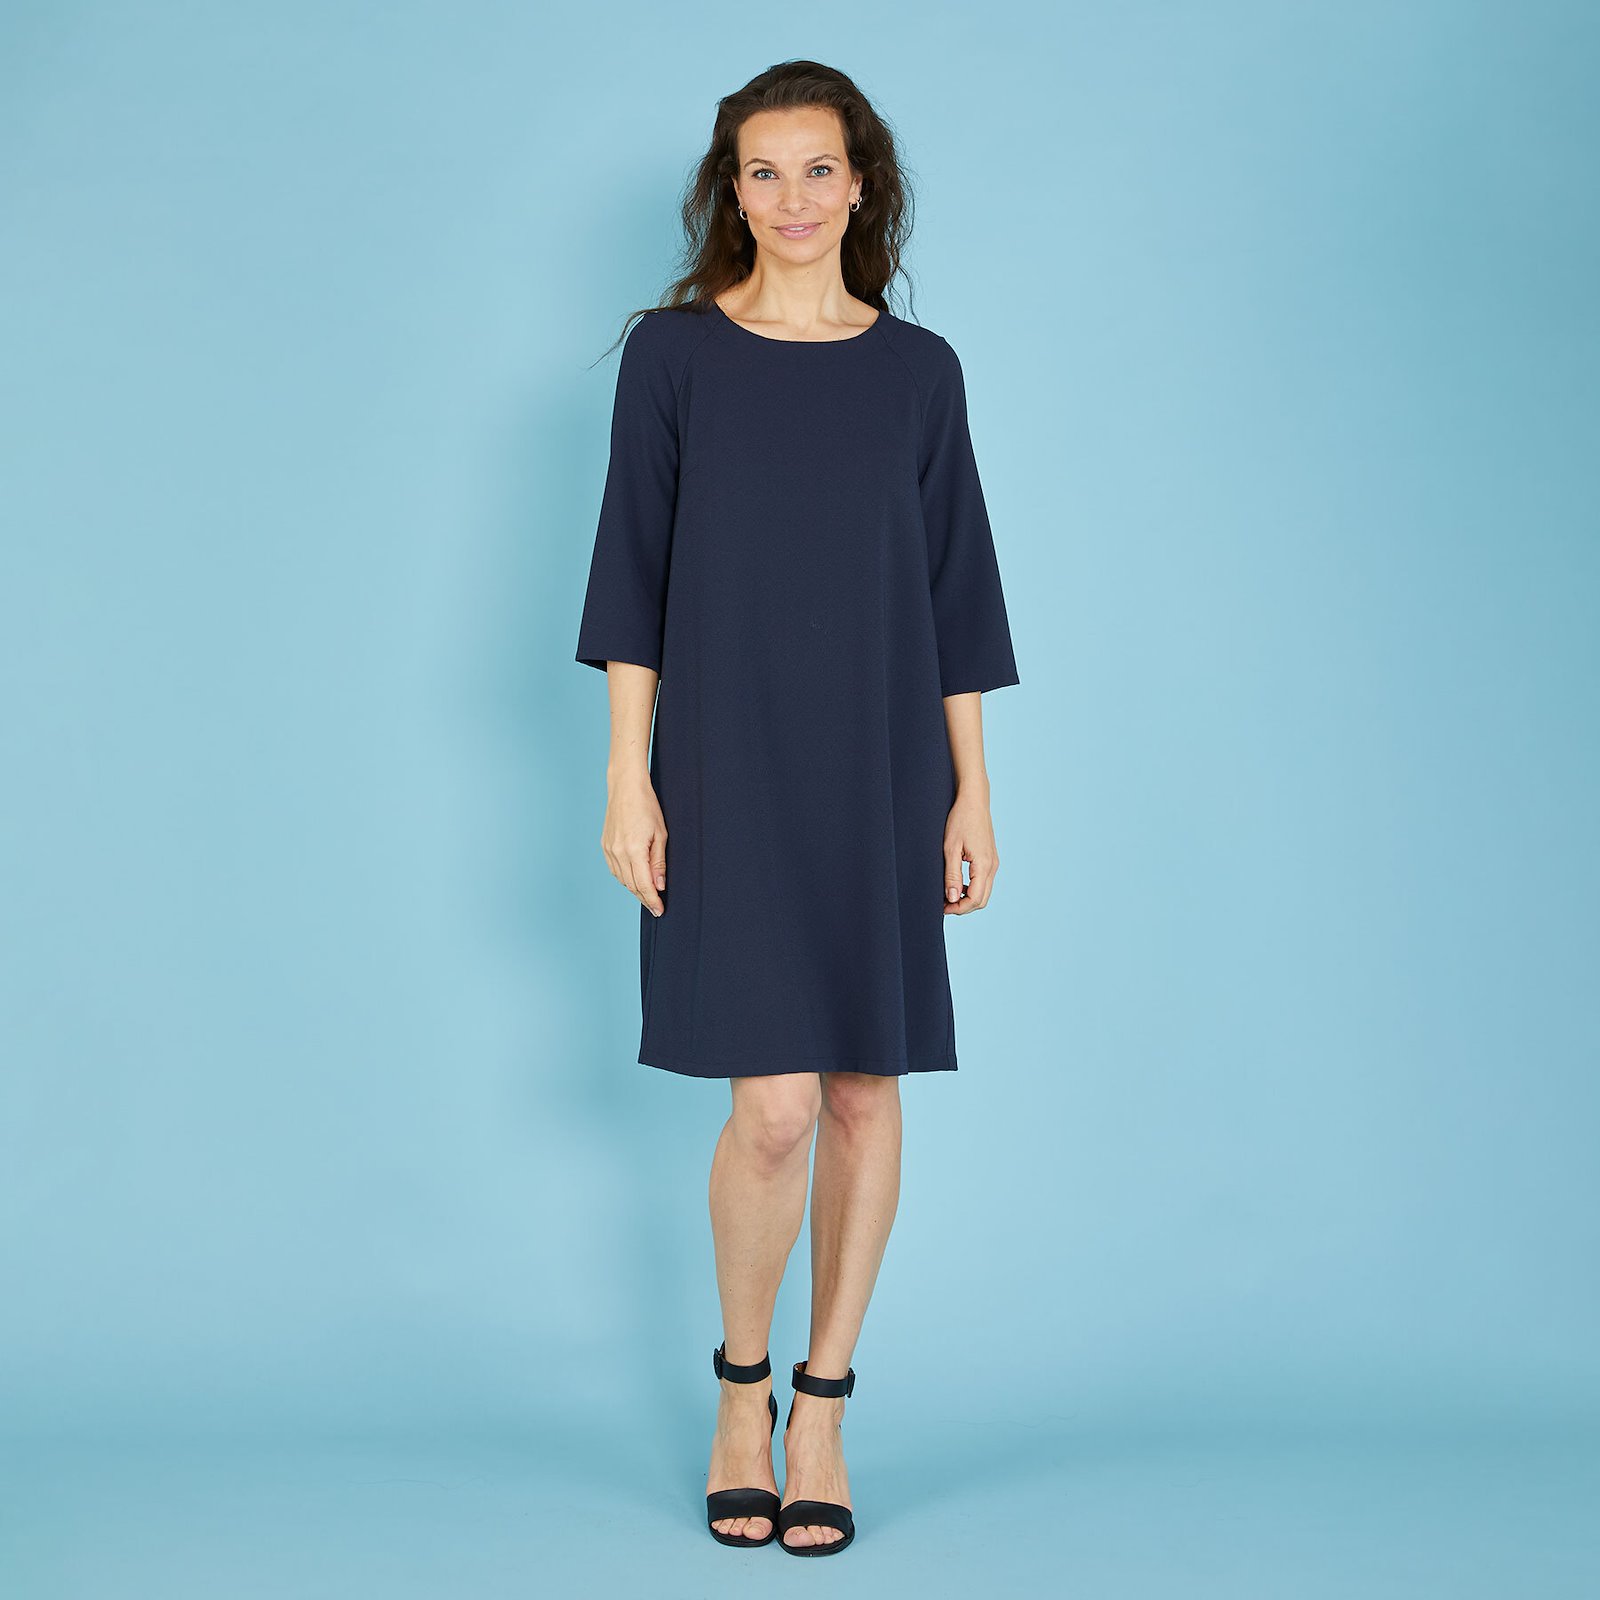 Dress with A-shape and raglan sle, 46/18 p23175000_p23175001_p23175002_p23175003_p23175004_pack_d